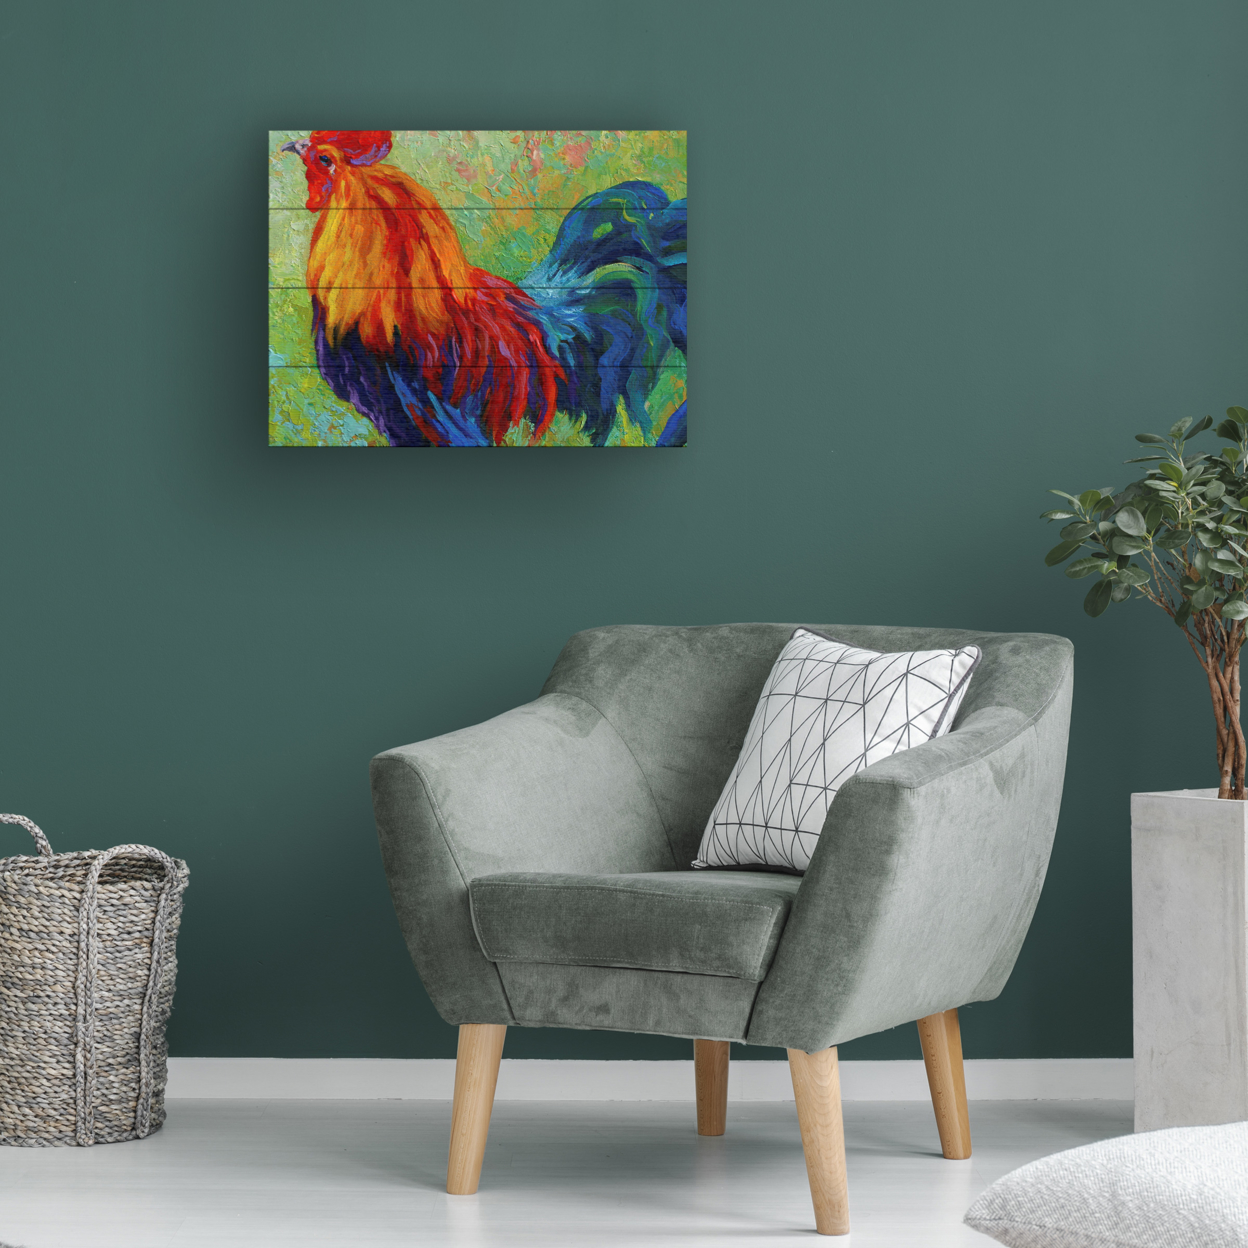 Wall Art 12 X 16 Inches Titled Band Of Gold Rooster Ready To Hang Printed On Wooden Planks